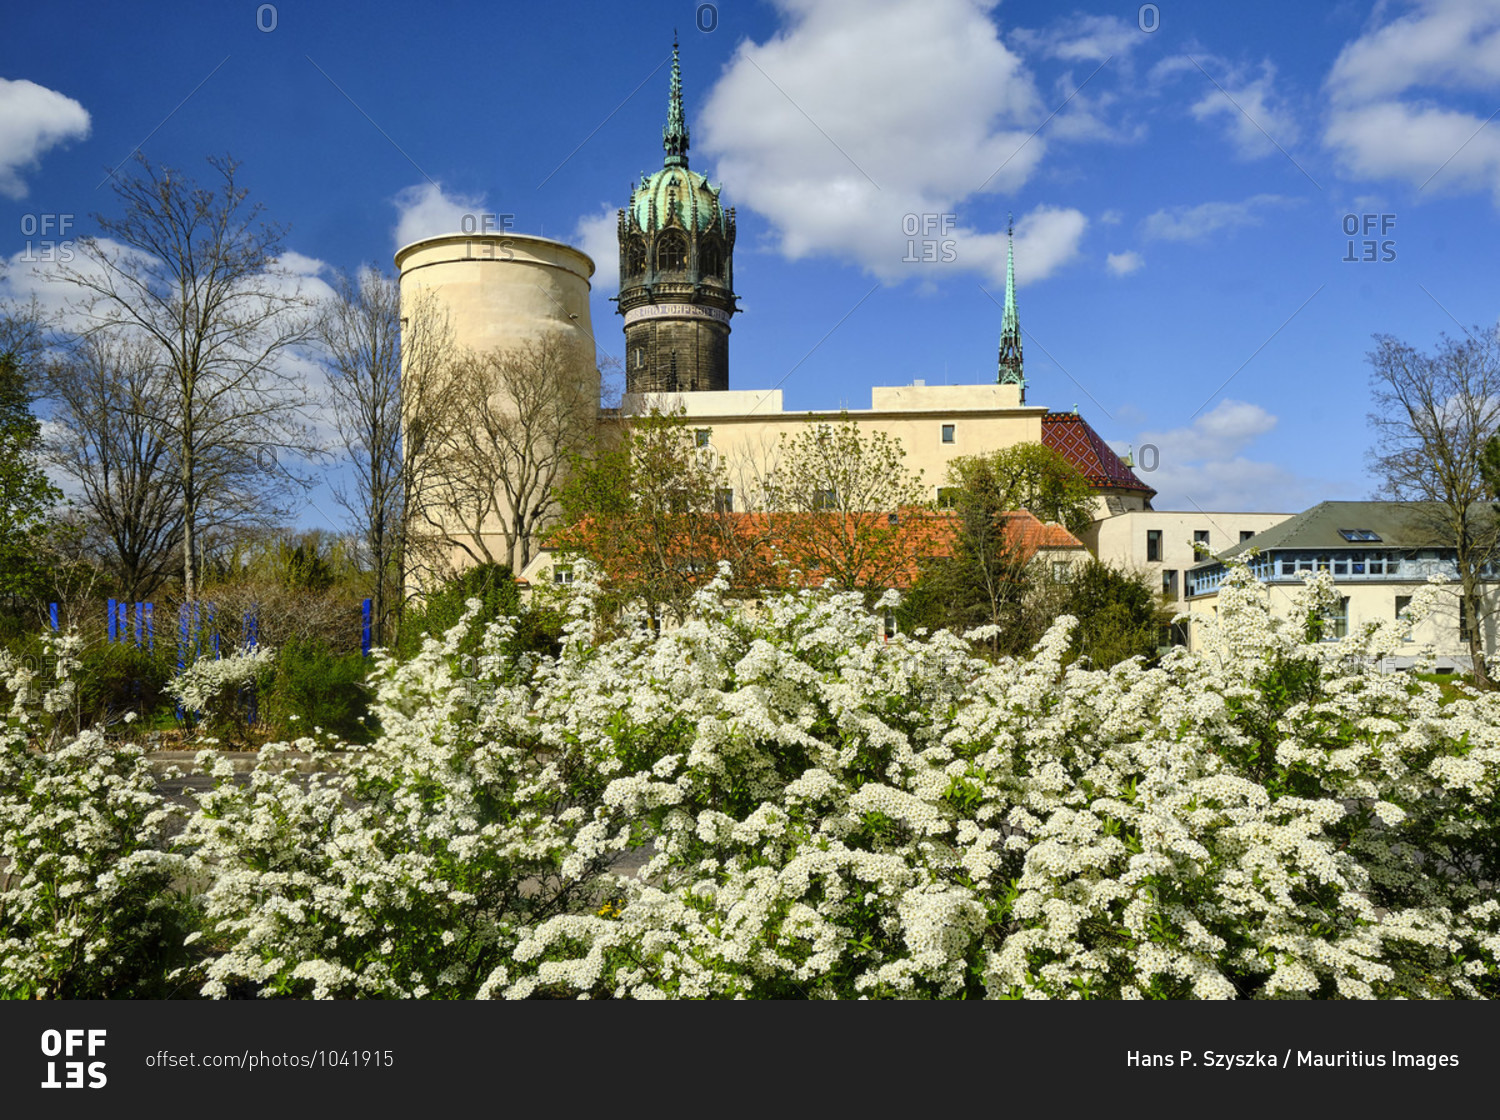 Castle and castle church in Wittenberg, Saxony-Anhalt, Germany